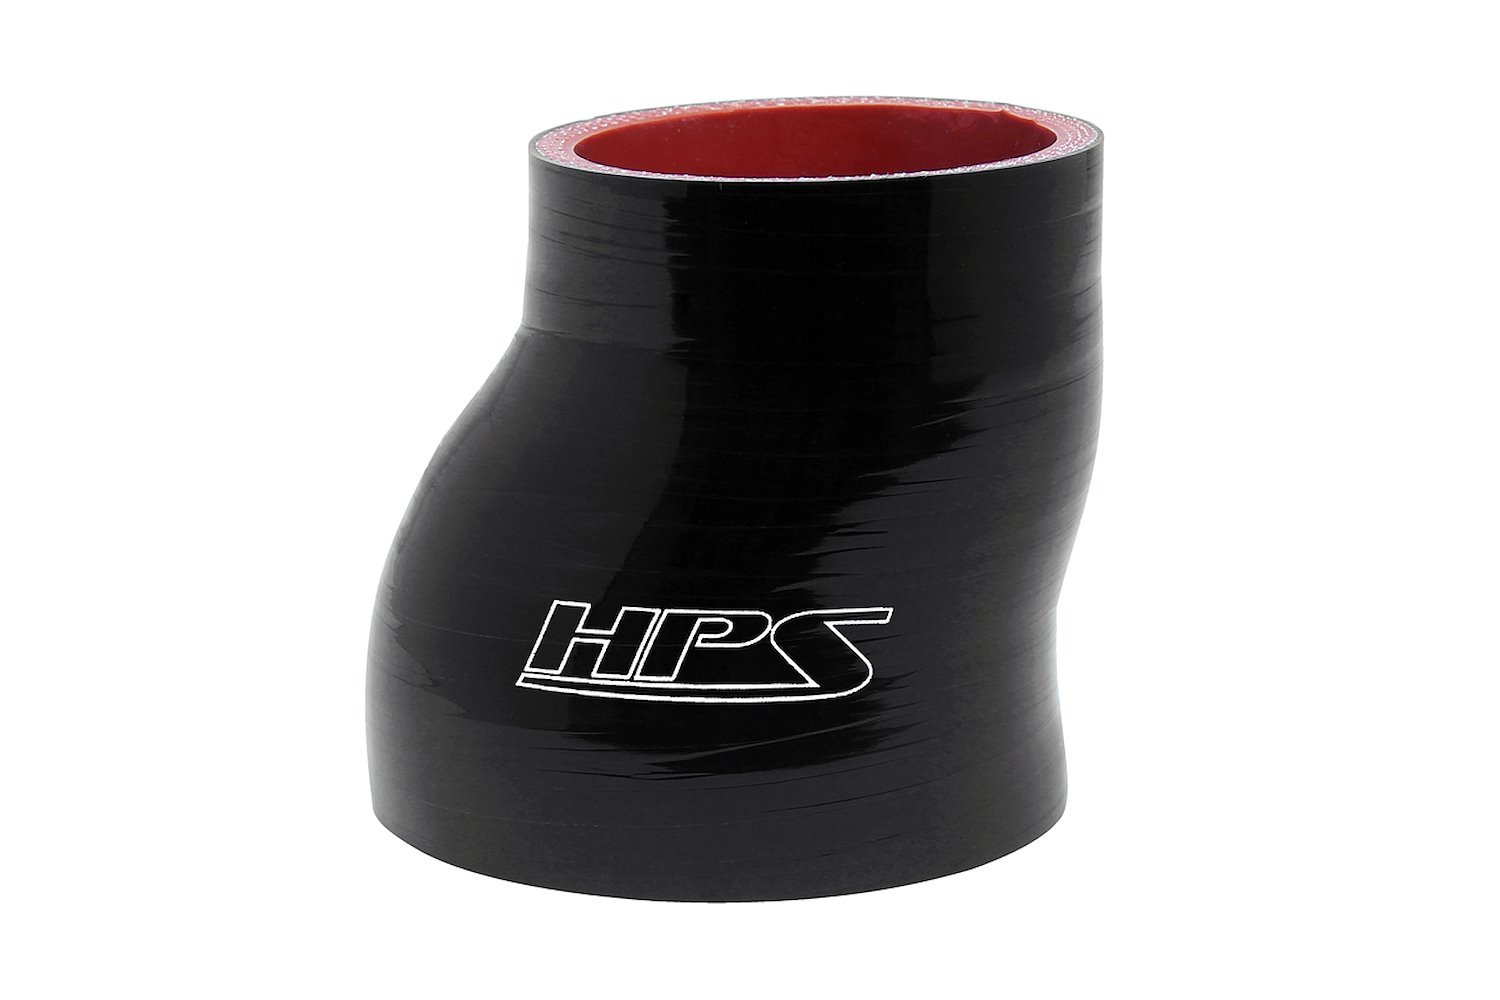 HTSOR-275-300-BLK Silicone Offset Reducer Hose, High-Temp Reinforced, 2-3/4 in. - 3 in. ID, 3 in. Long, Black